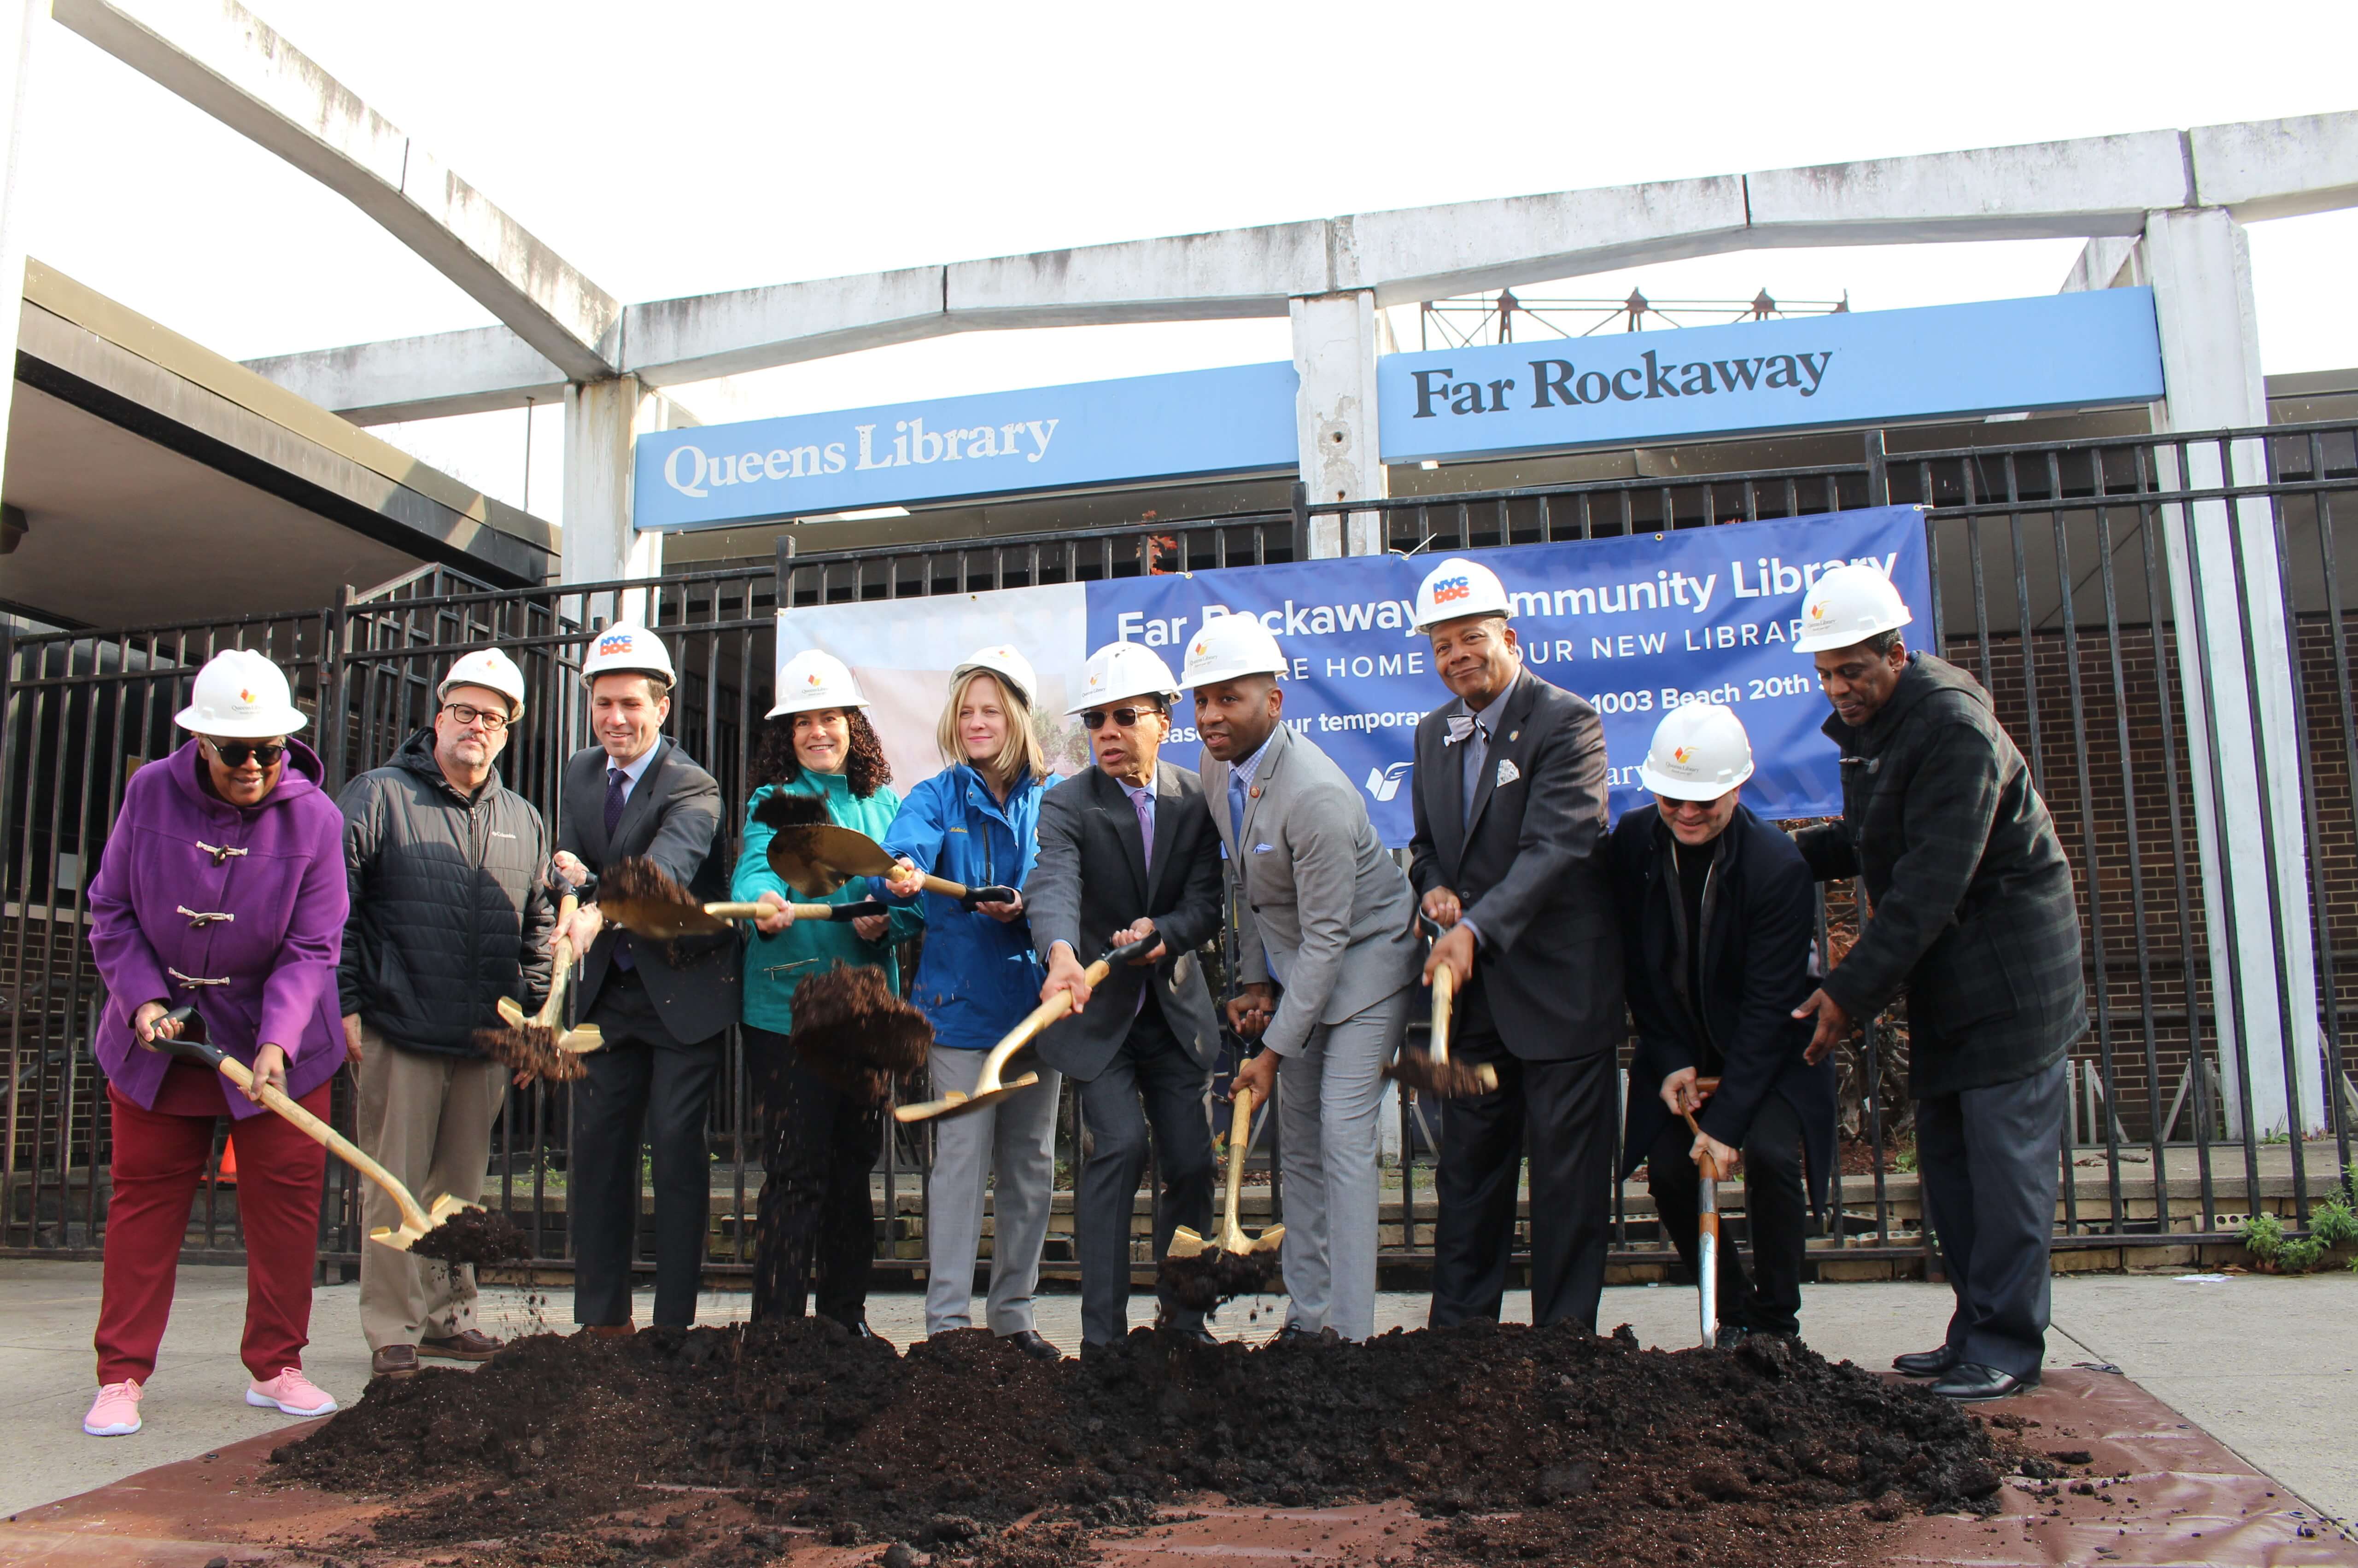 Officials broke ground on the new Far Rockaway branch of the Queens Library on Nov. 19.